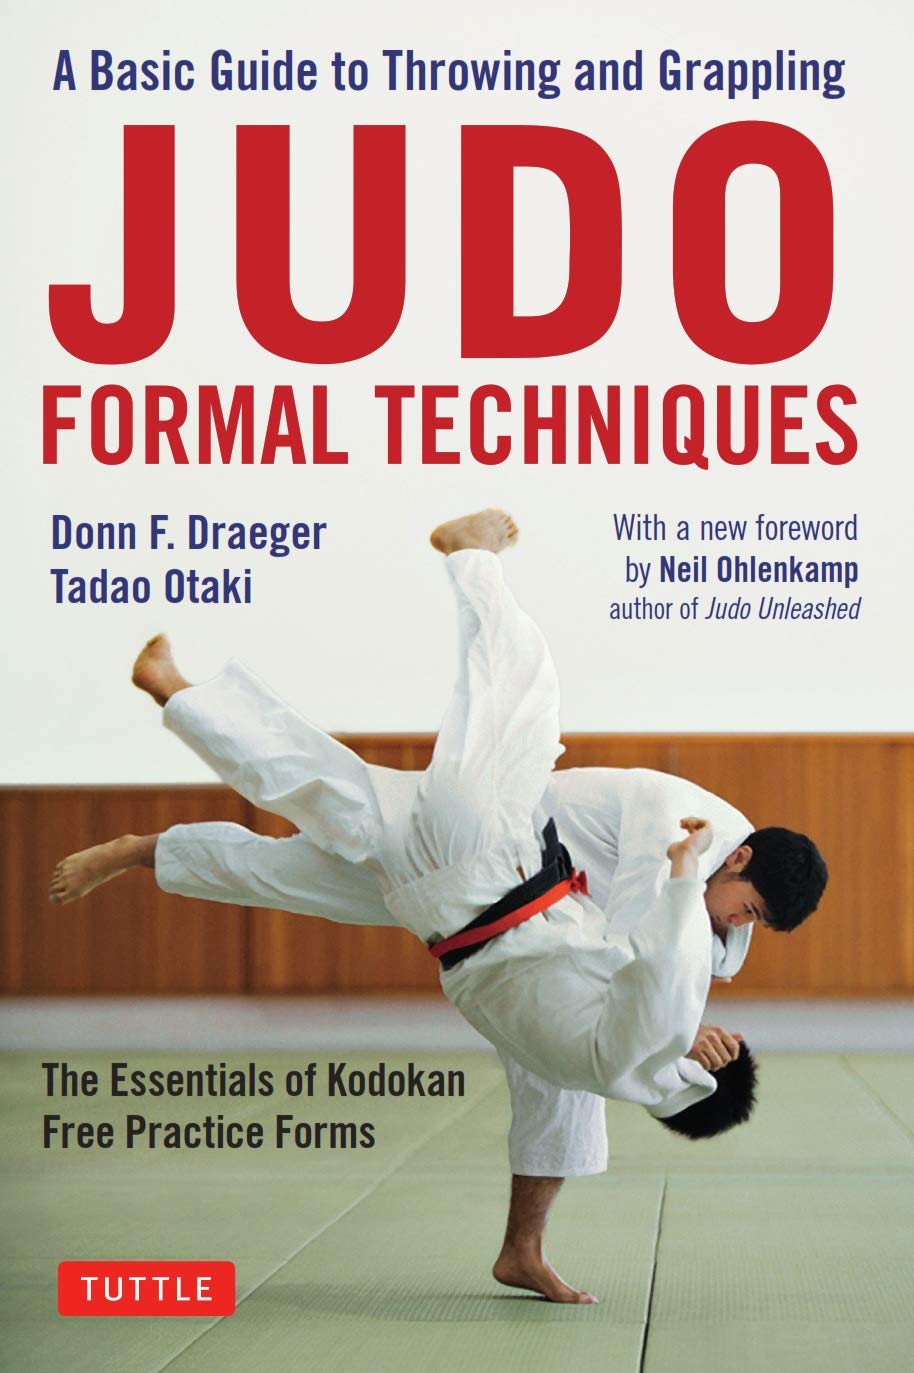 Judo Formal Techniques: A Basic Guide to Throwing and Grappling - The Essentials of Kodokan Free Practice Forms Book by Donn Draeger